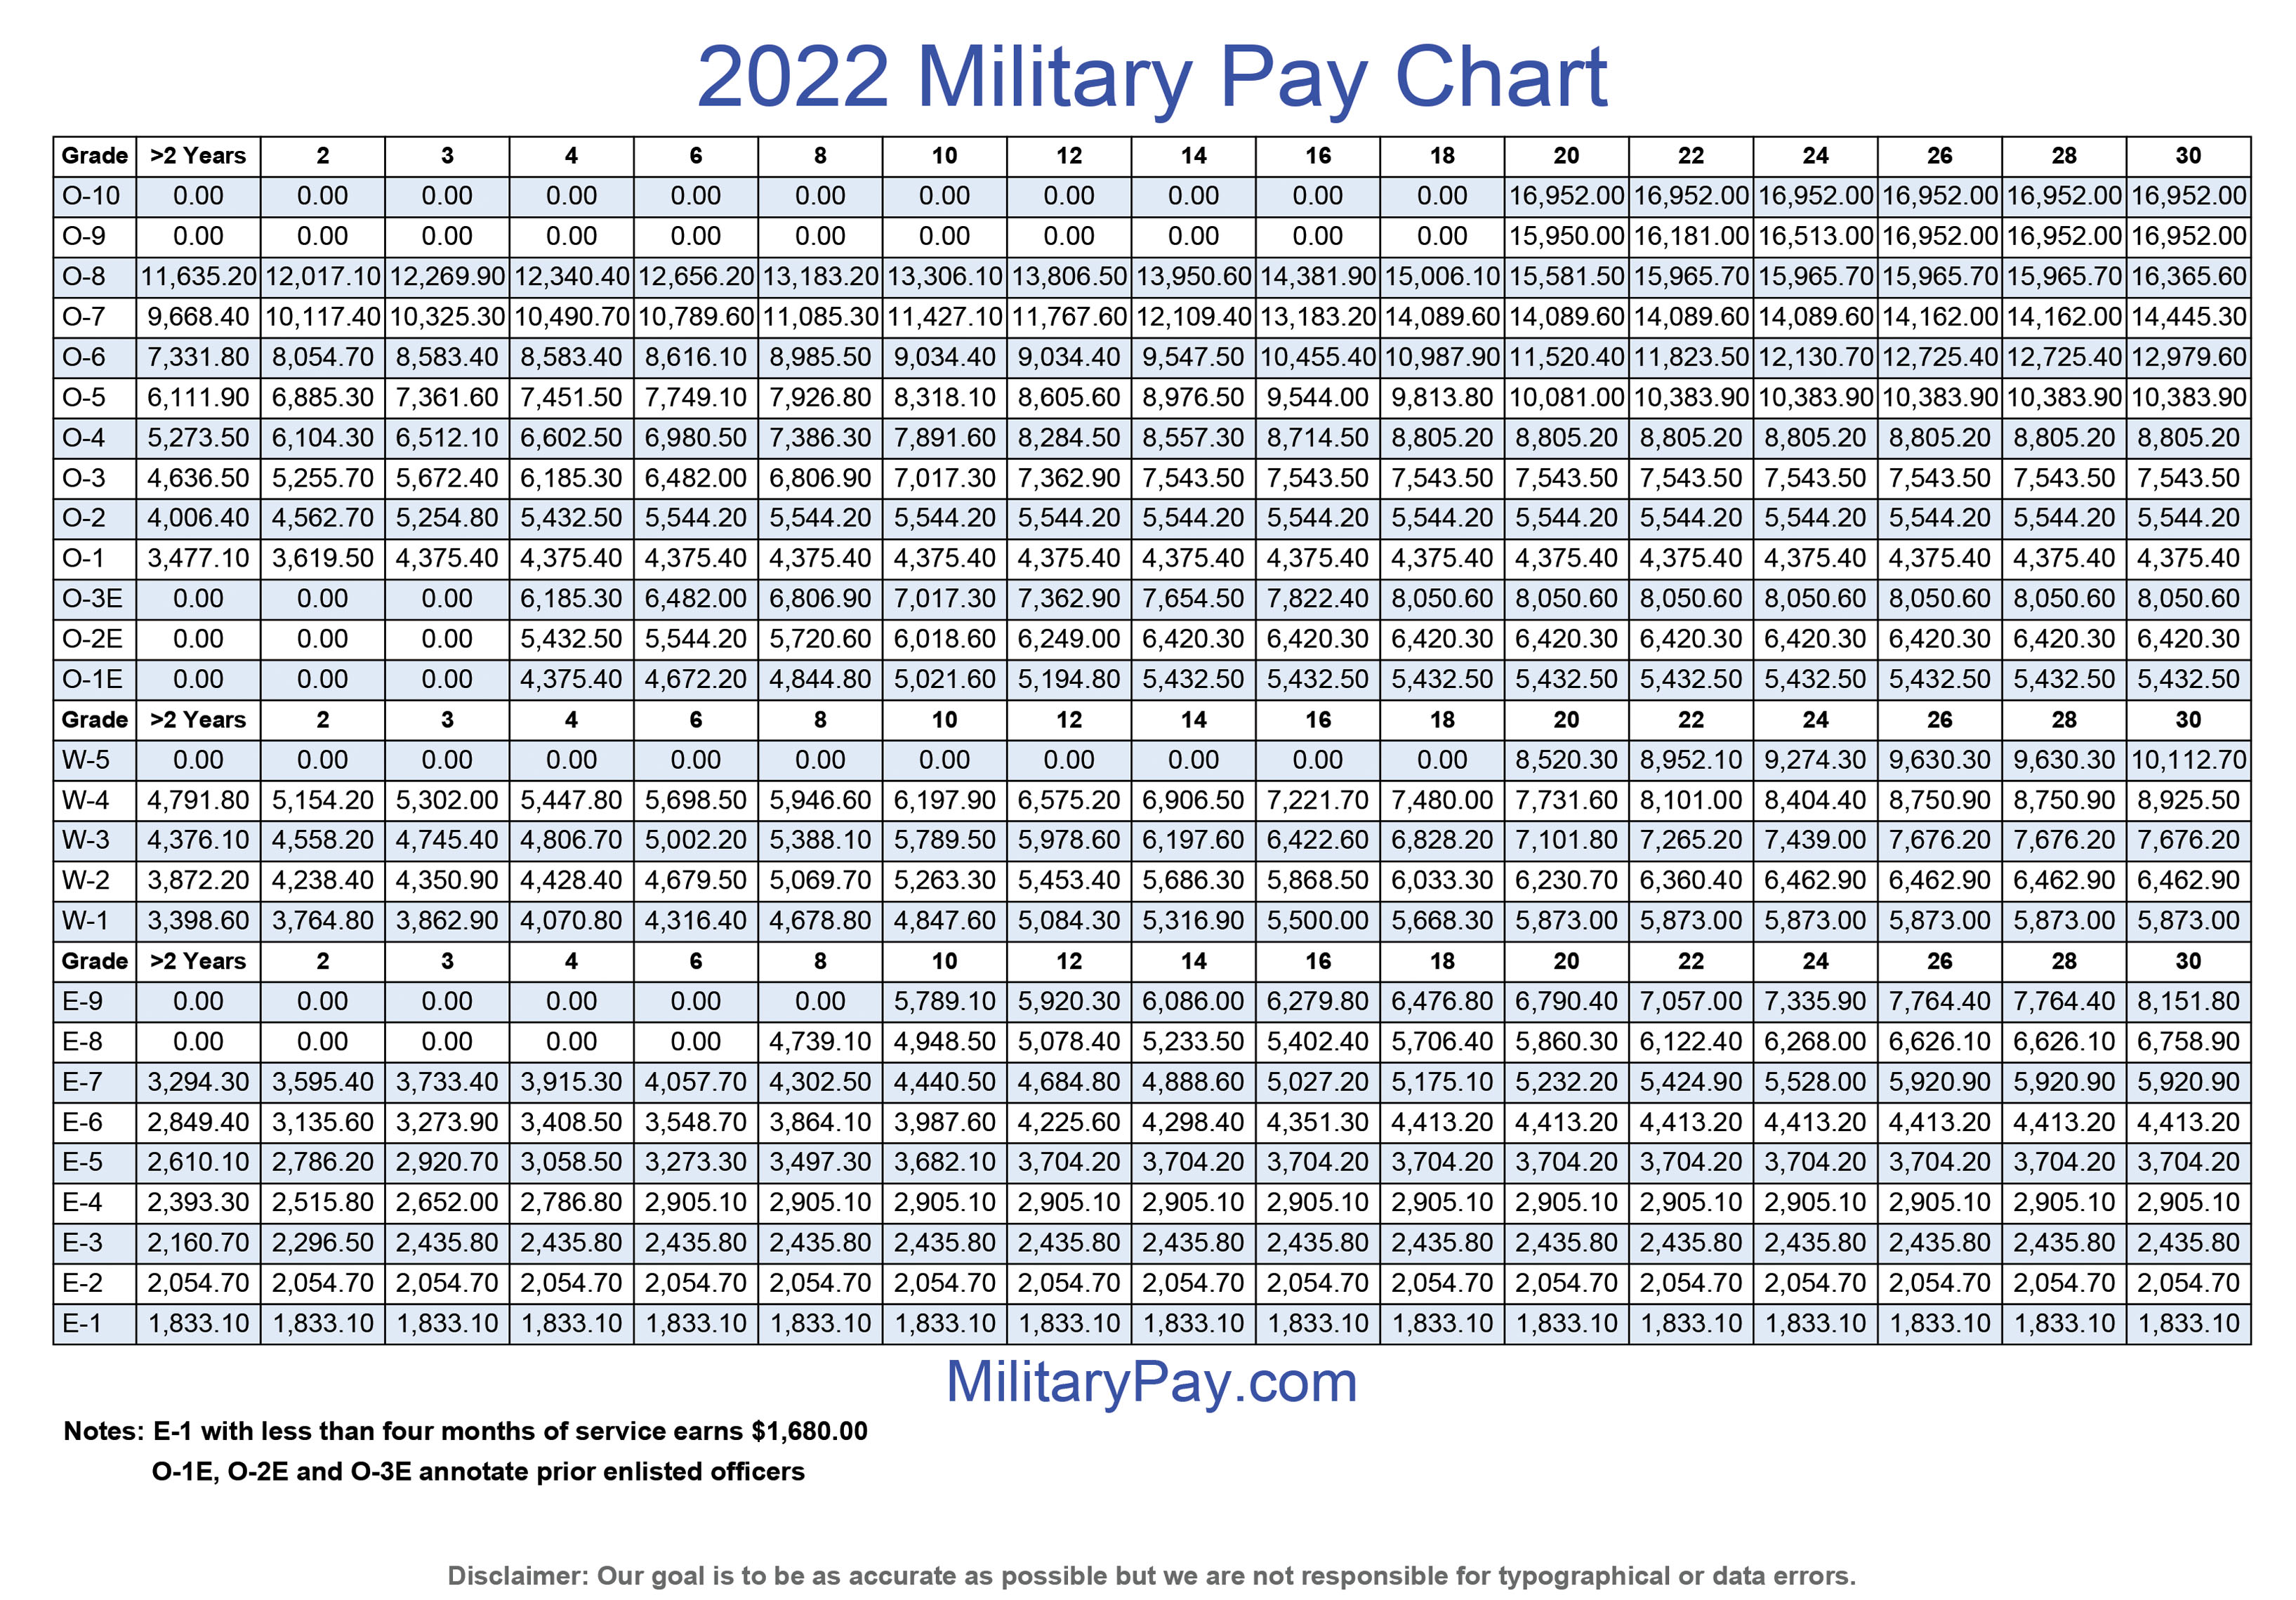 military-pay-charts-1949-to-2022-plus-estimated-to-2050